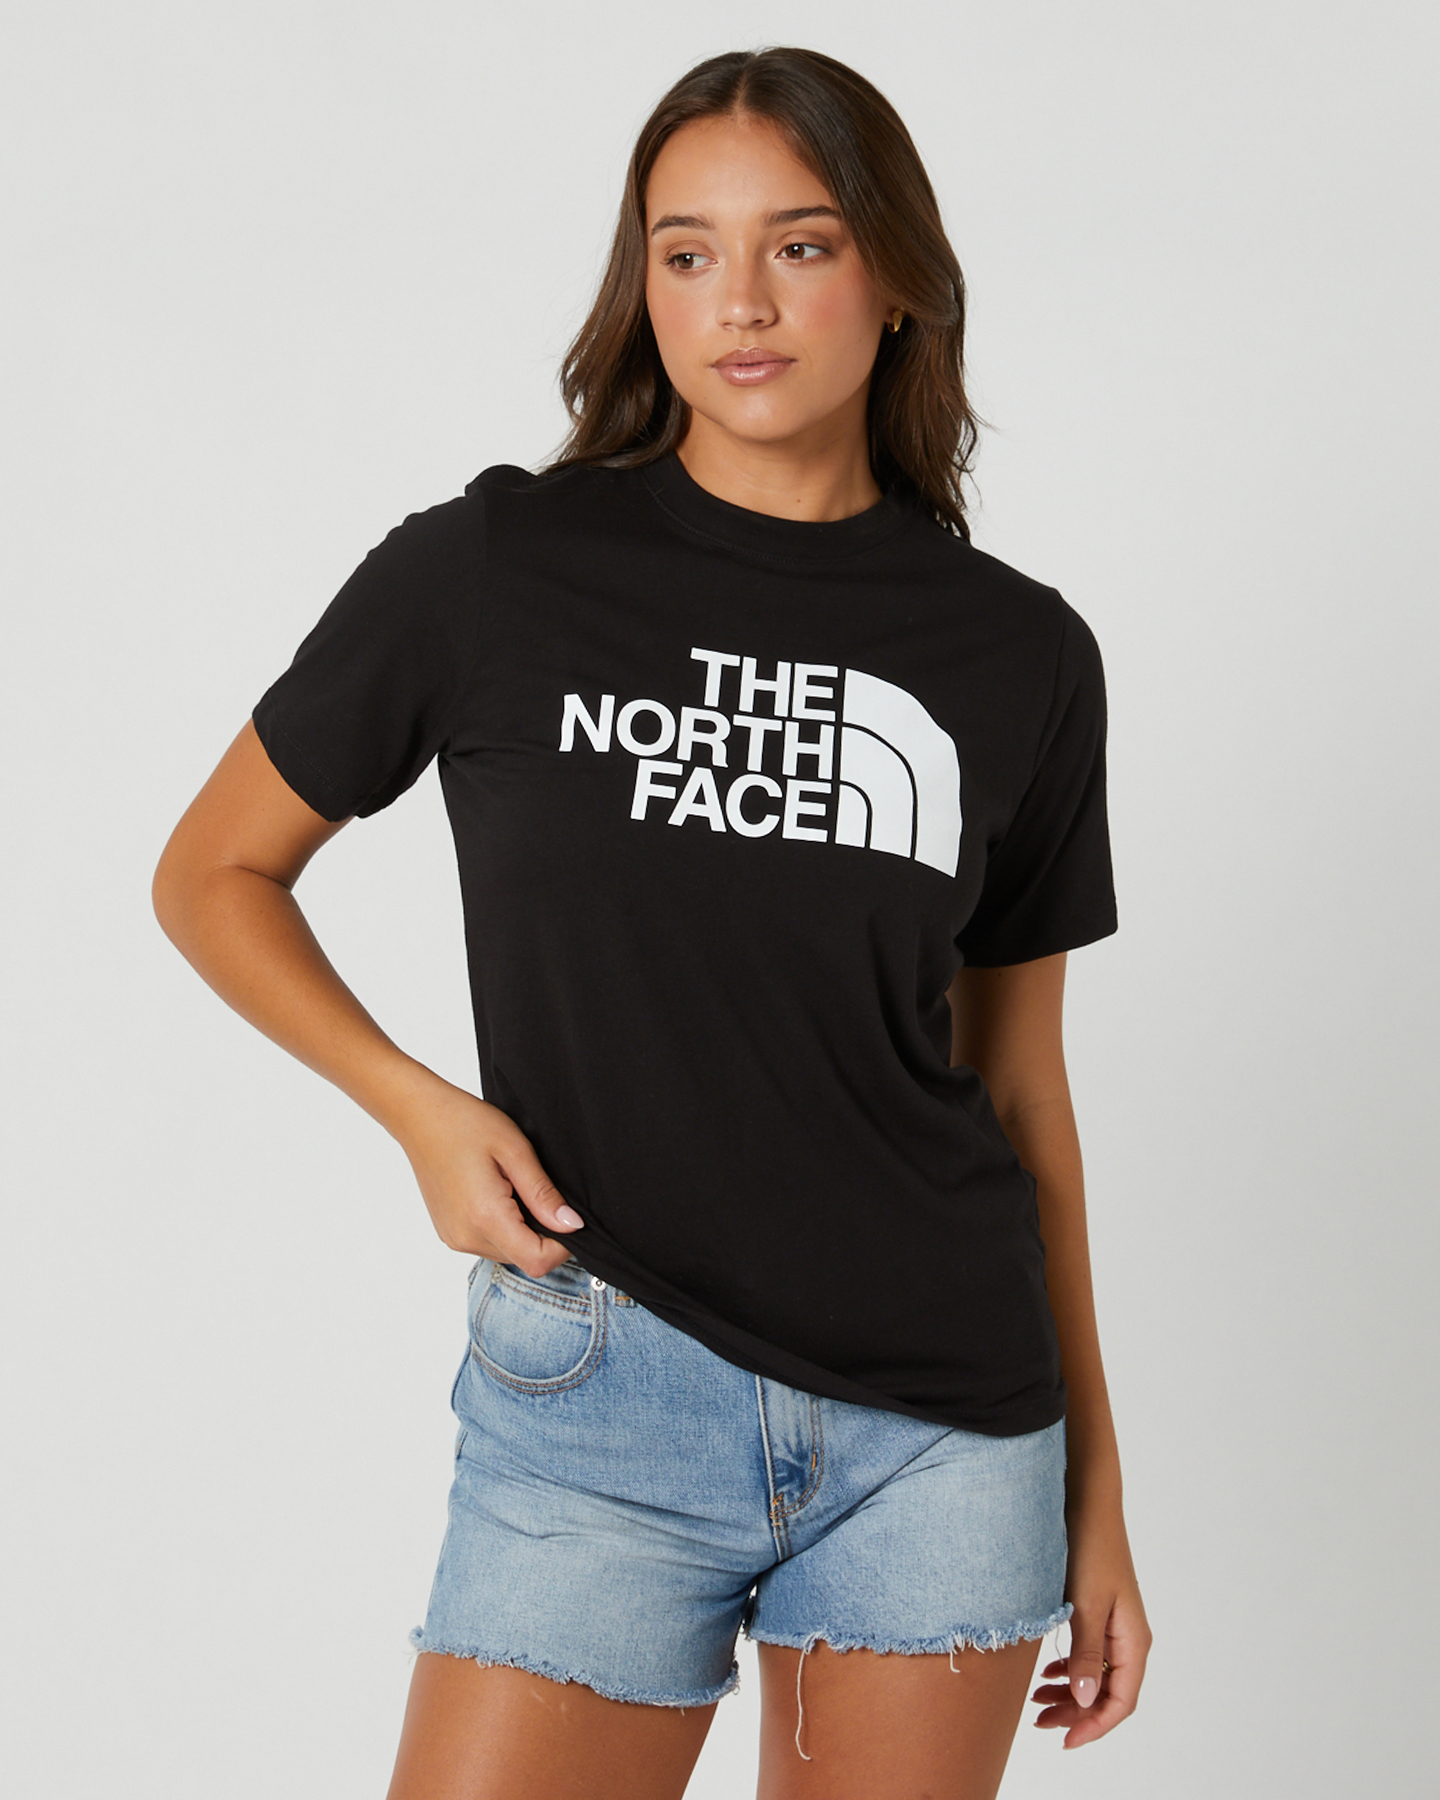 The North Face Women's S/S Half Dome Tee - Tnf Black Tnf White | SurfStitch